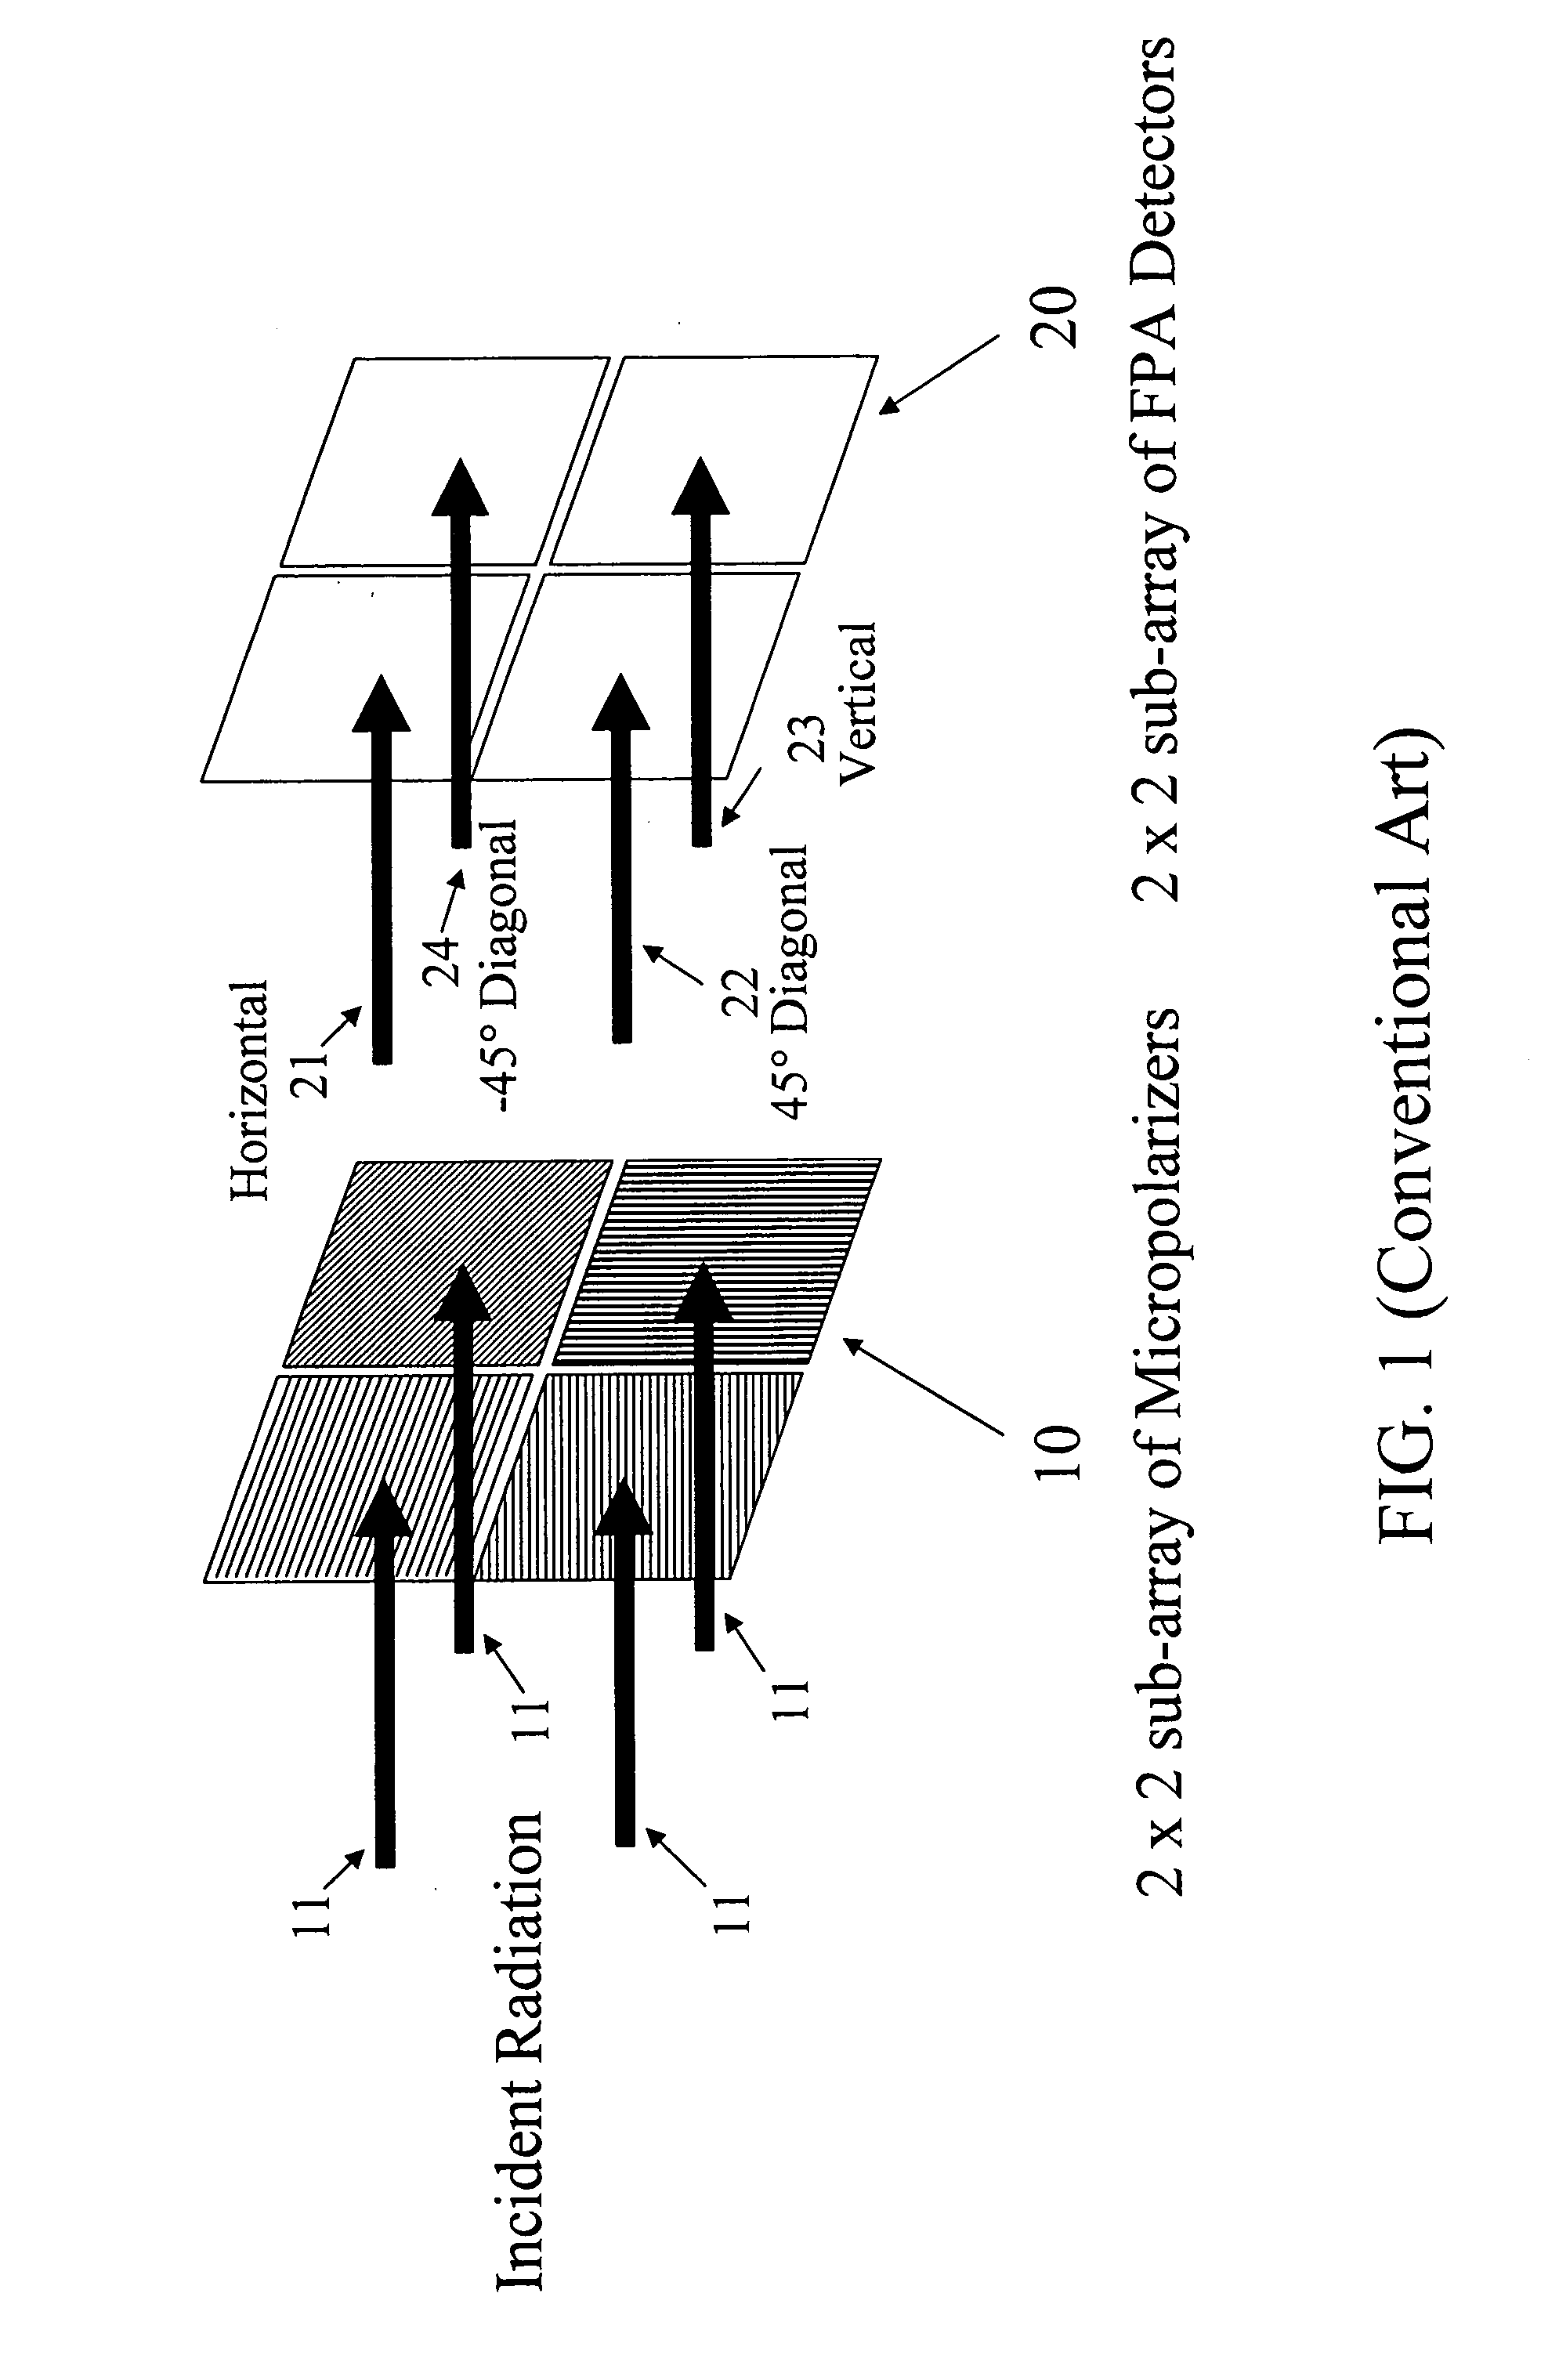 Method for enhancing polarimeter systems that use micro-polarizers